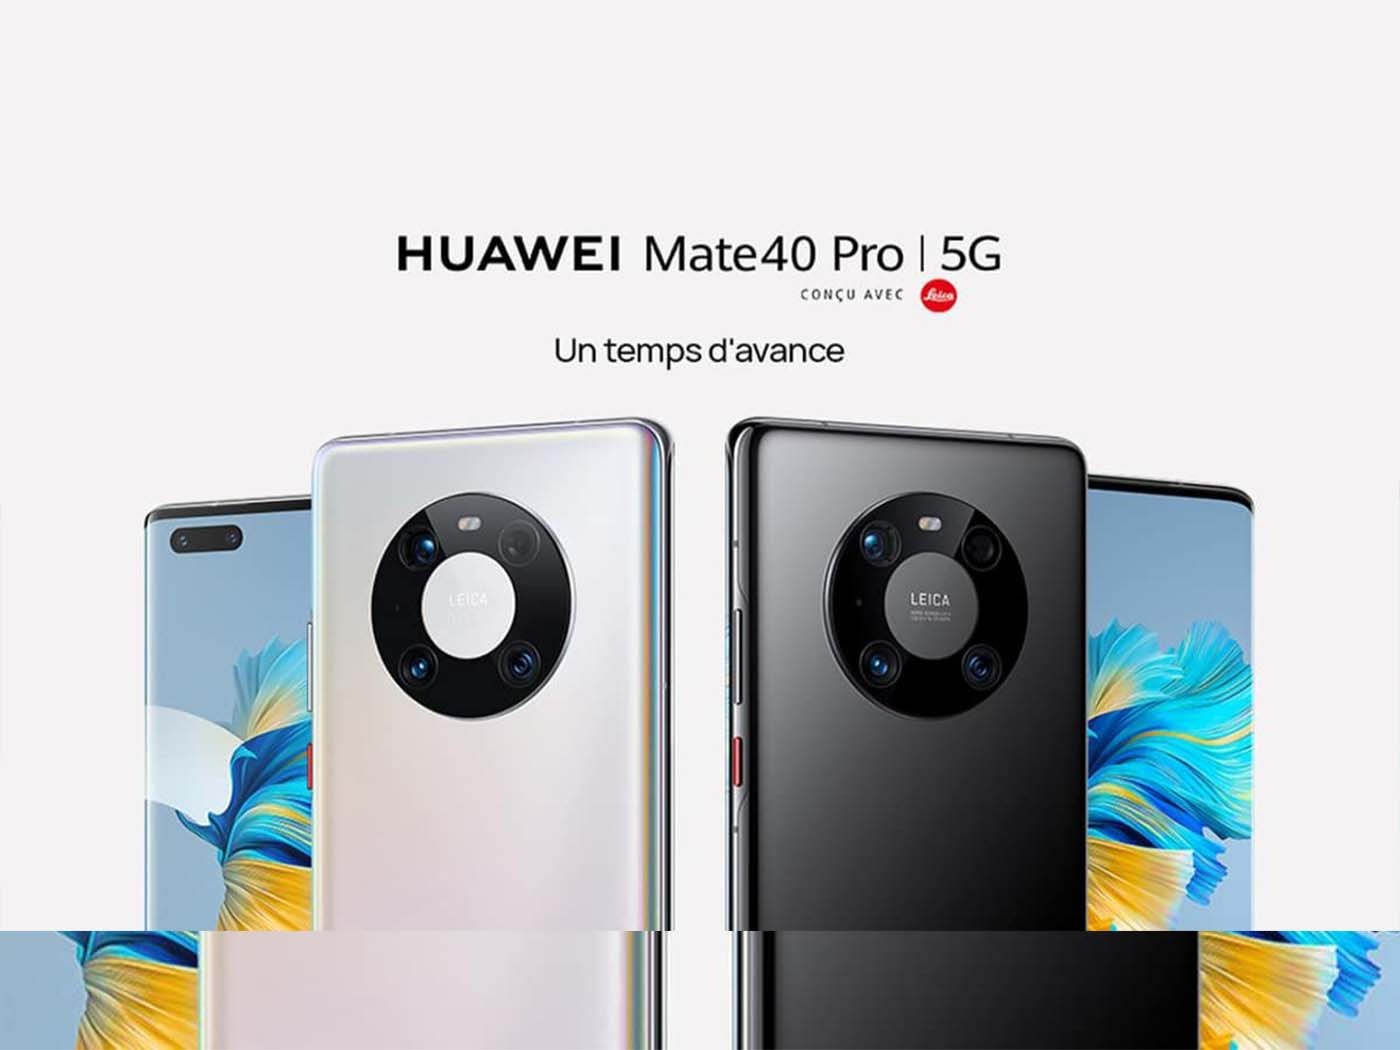 Huawei Mate 40 Pro: A Powerful Camera in Your Hand